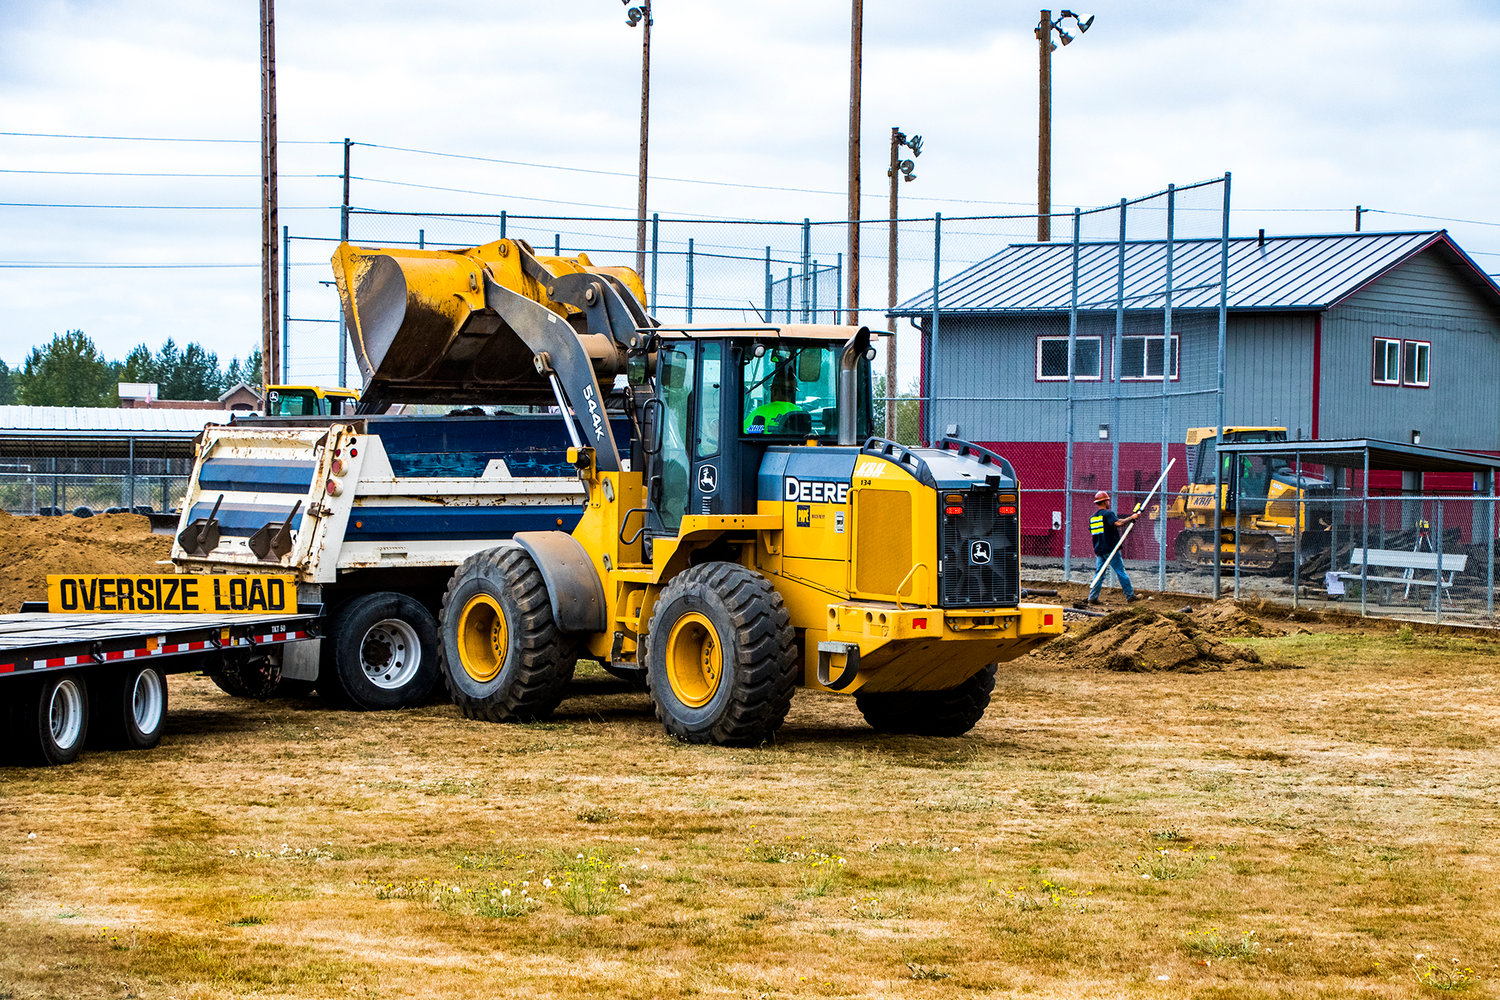 Construction crews break ground at the Recreation Park Baseball Fields, Thursday afternoon in Chehalis.